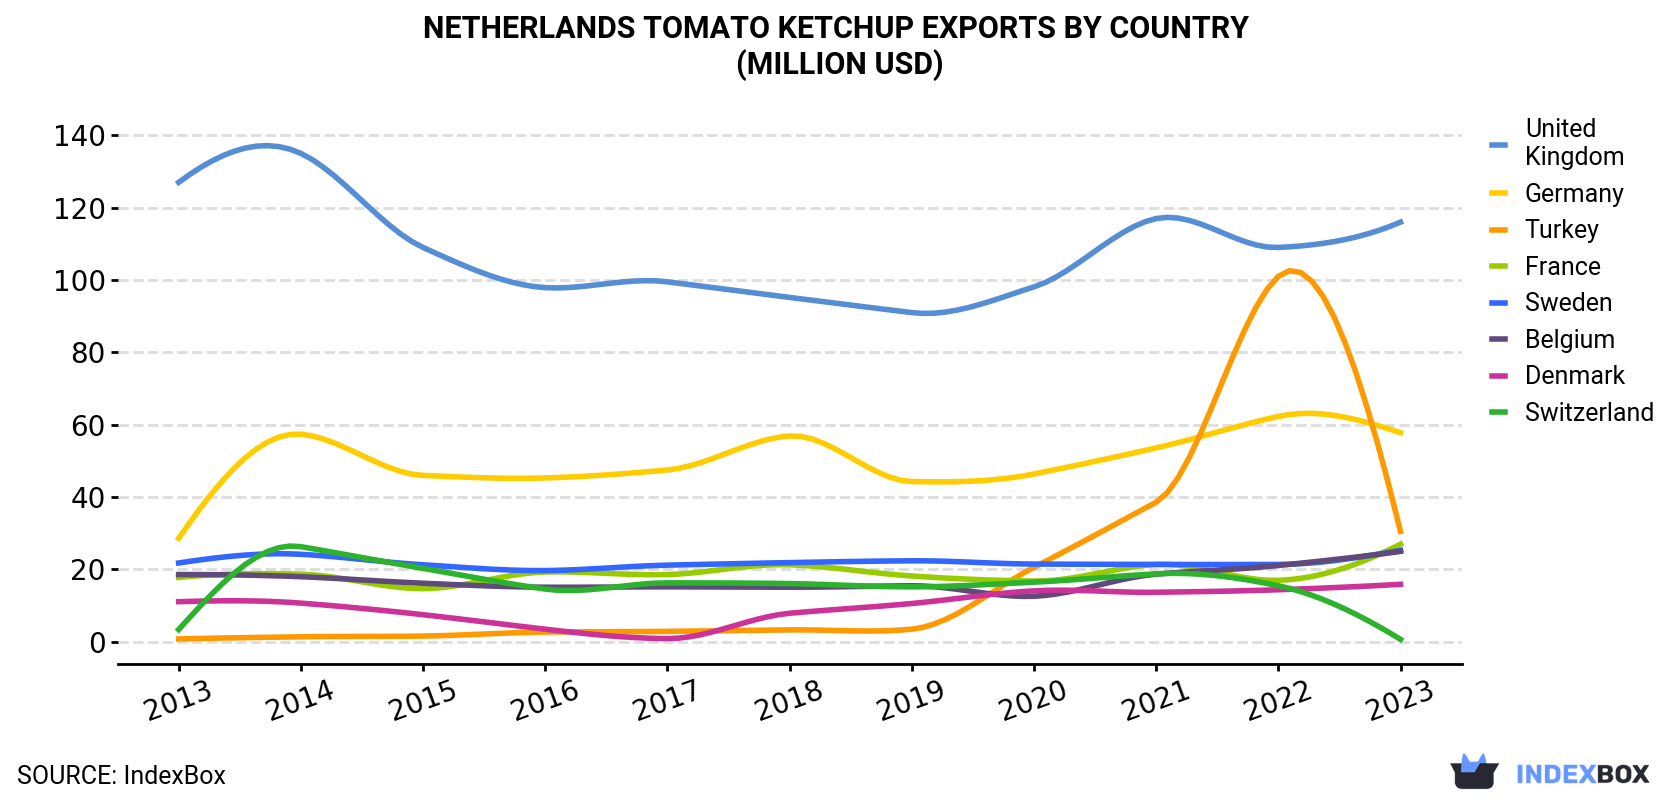 Netherlands Tomato Ketchup Exports By Country (Million USD)